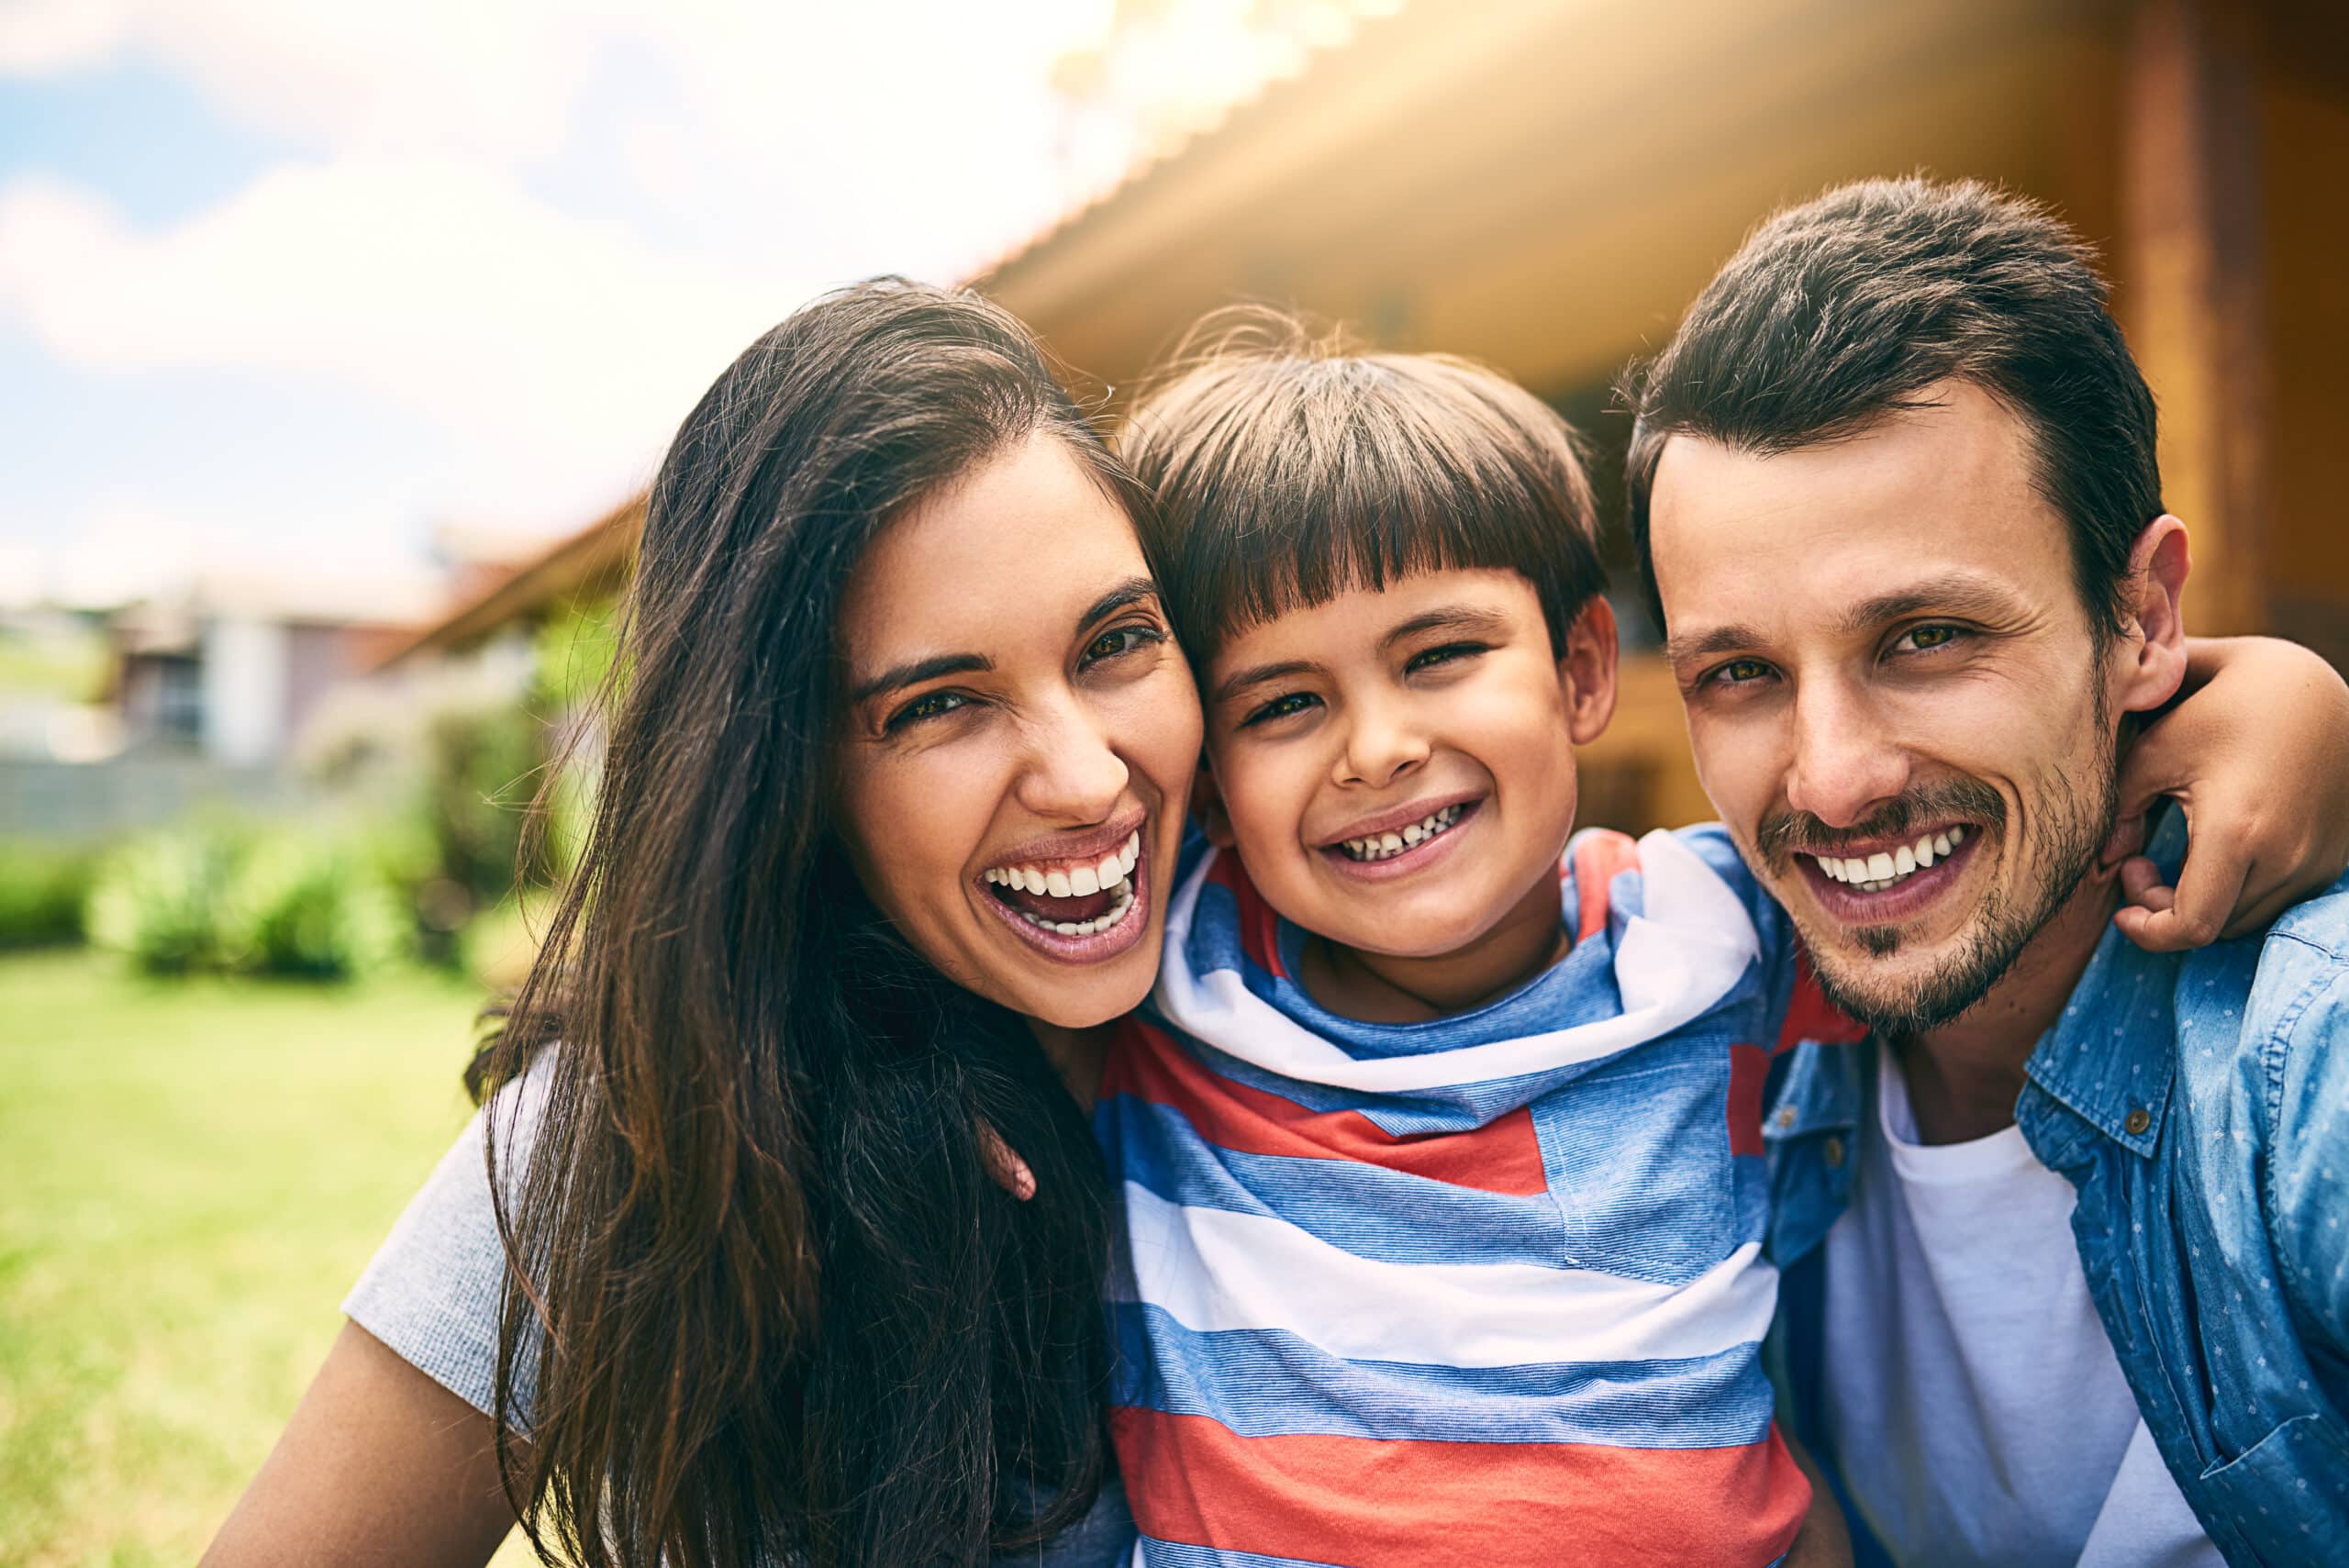 Our family dentistry services help patients of all ages achieve and maintain optimal oral health.